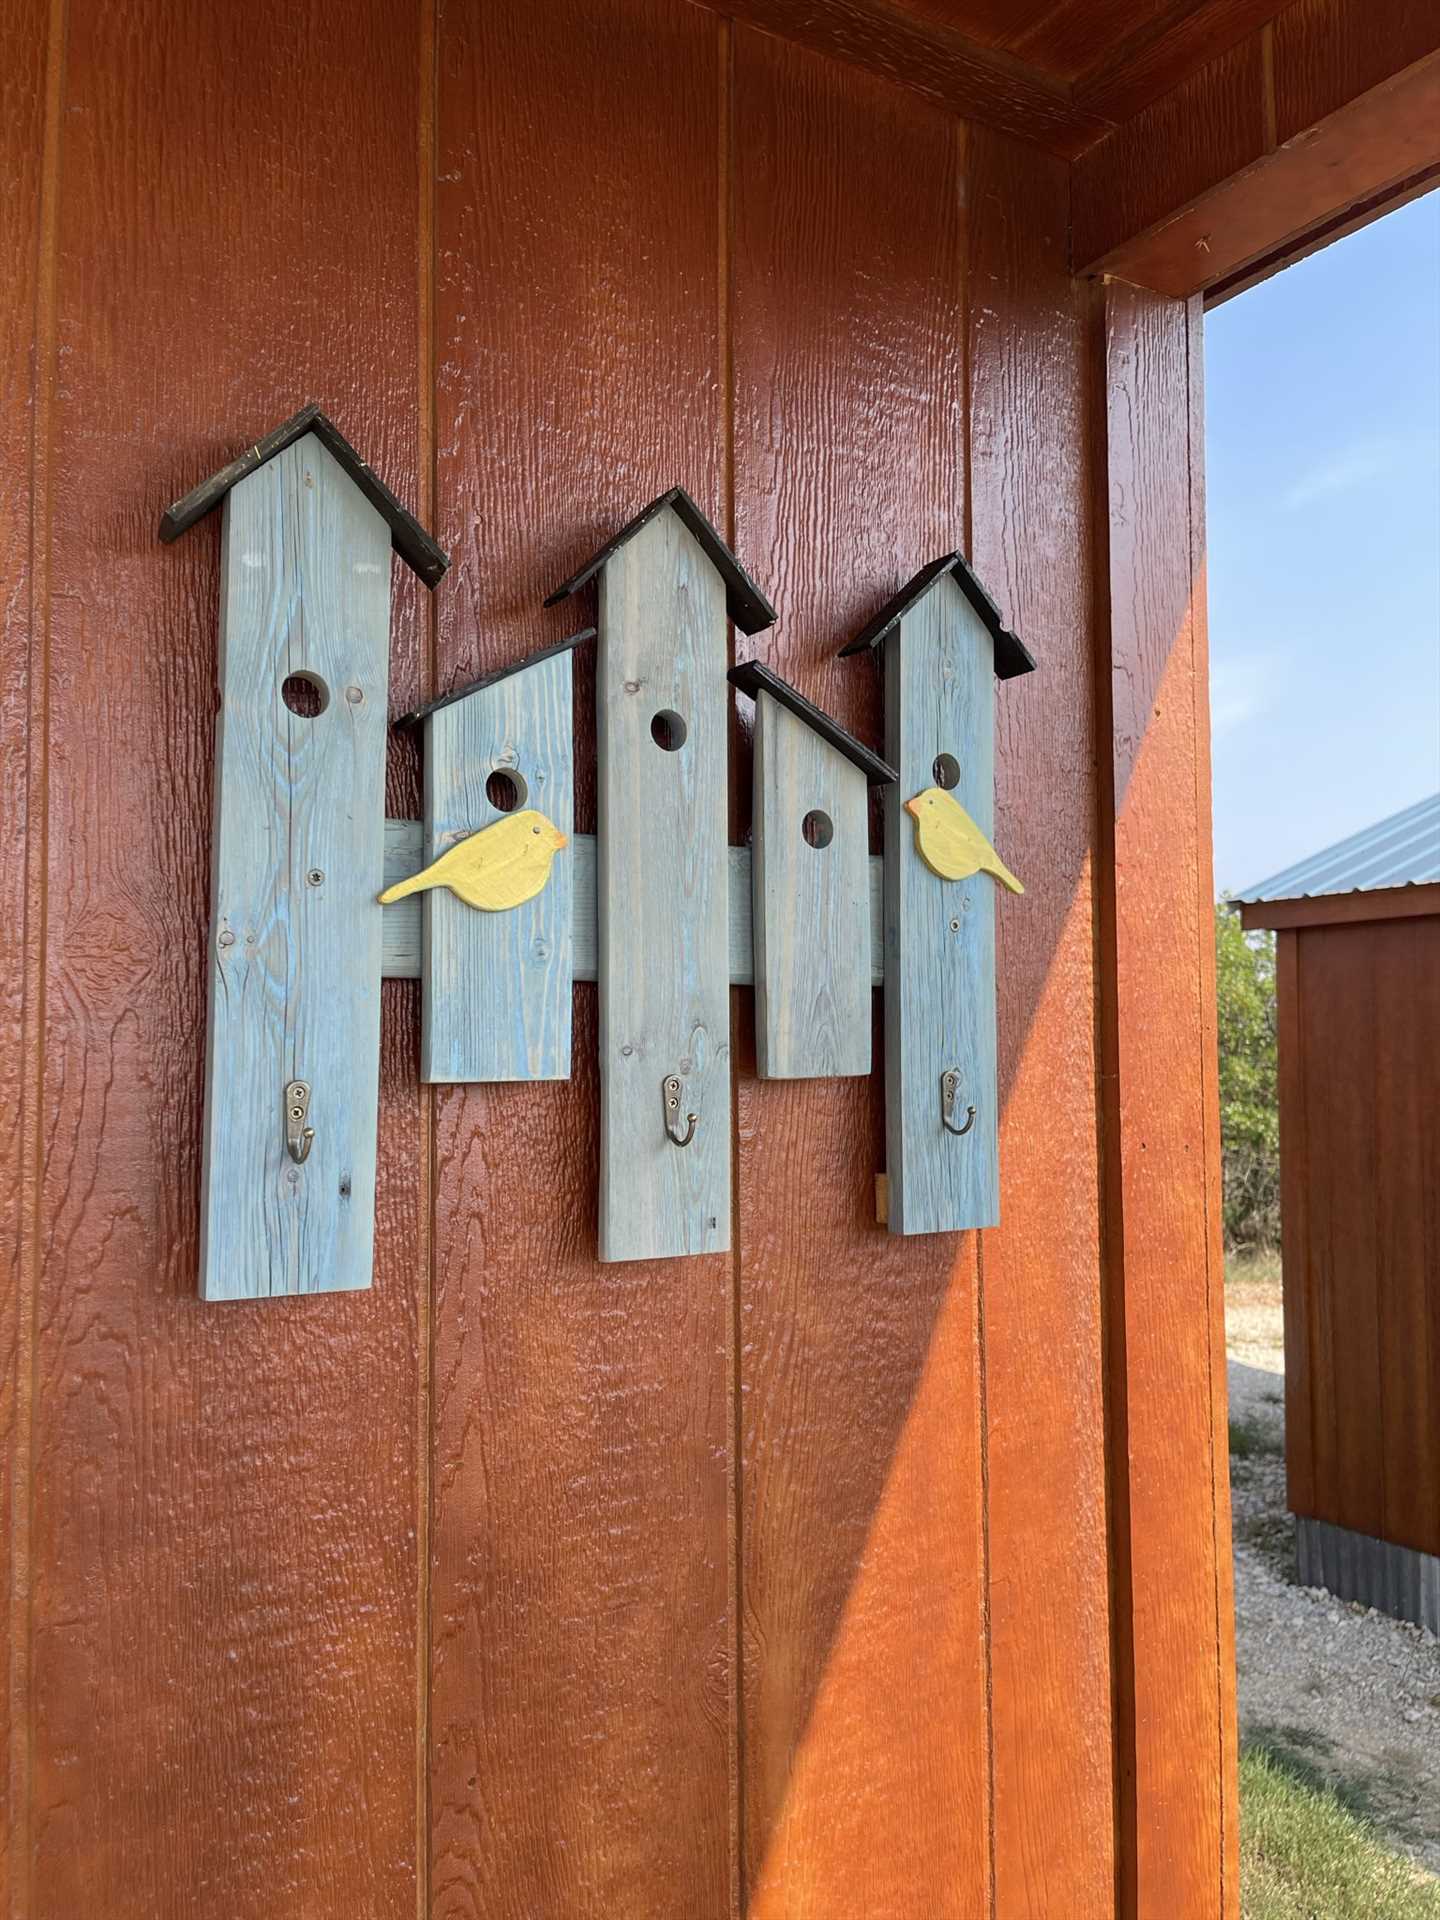                                                 This whimsical birdhouse decor lets you know you've found your home in the Hill Country!